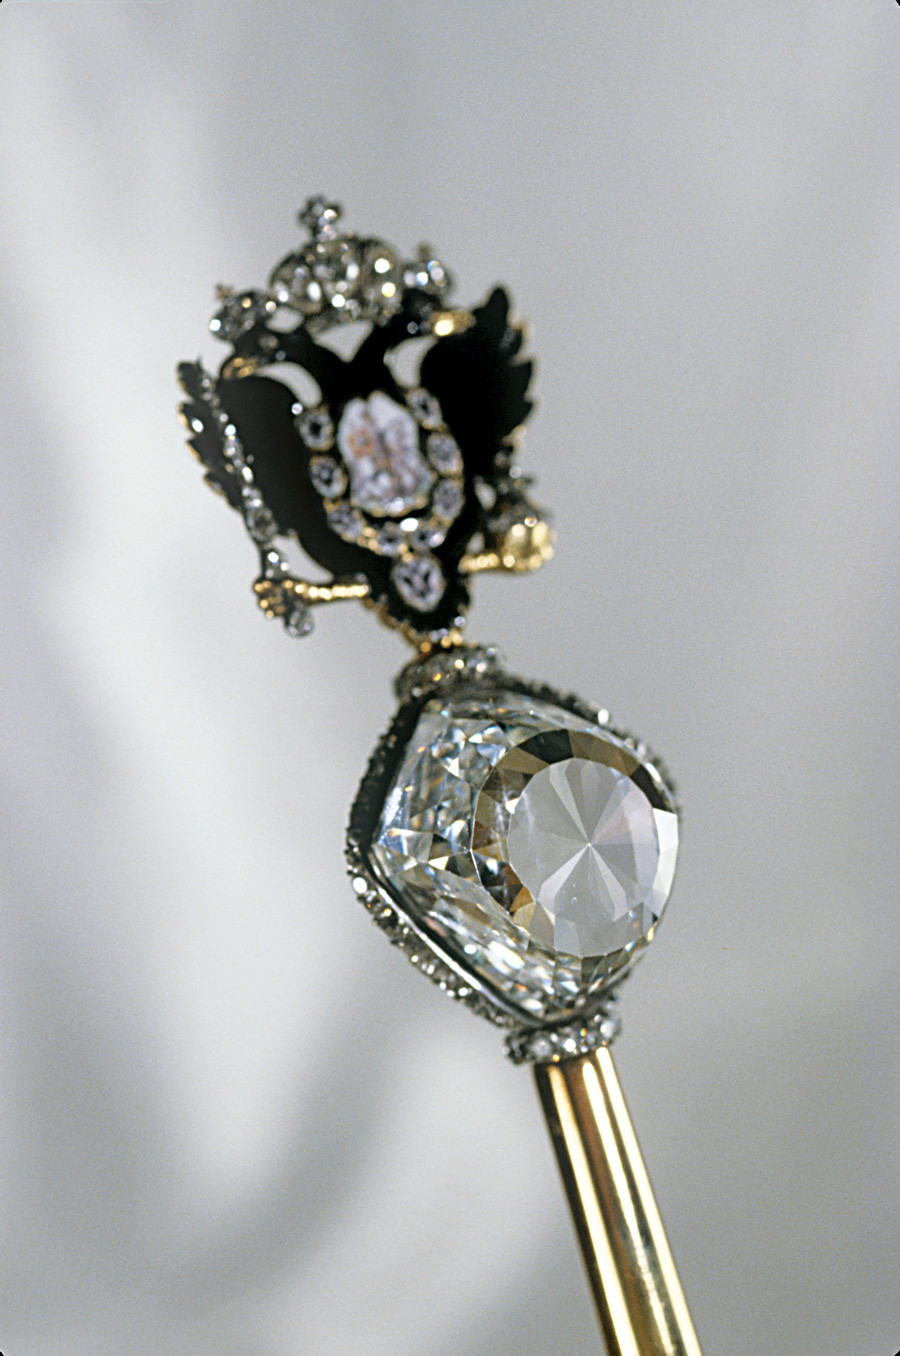 Imperial scepter made for Catherine the Great in the early 1770s. Topped by the Orlov diamond and a gold cast double-headed eagle.